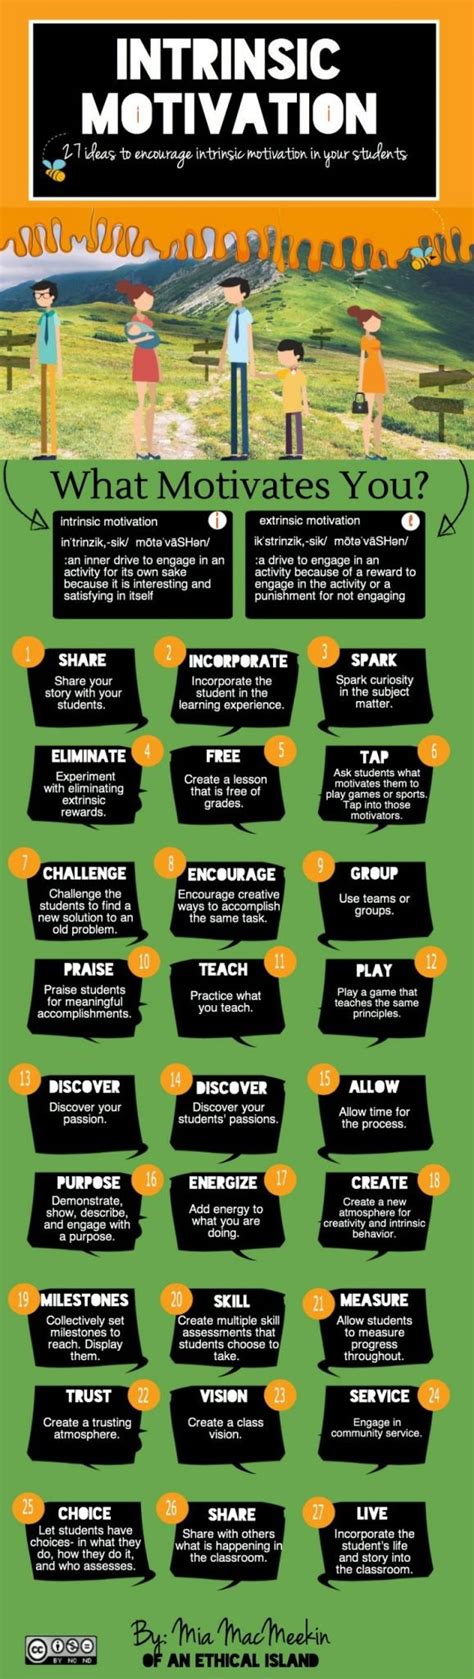 27 Ways To Promote Intrinsic Motivation In The Classroom